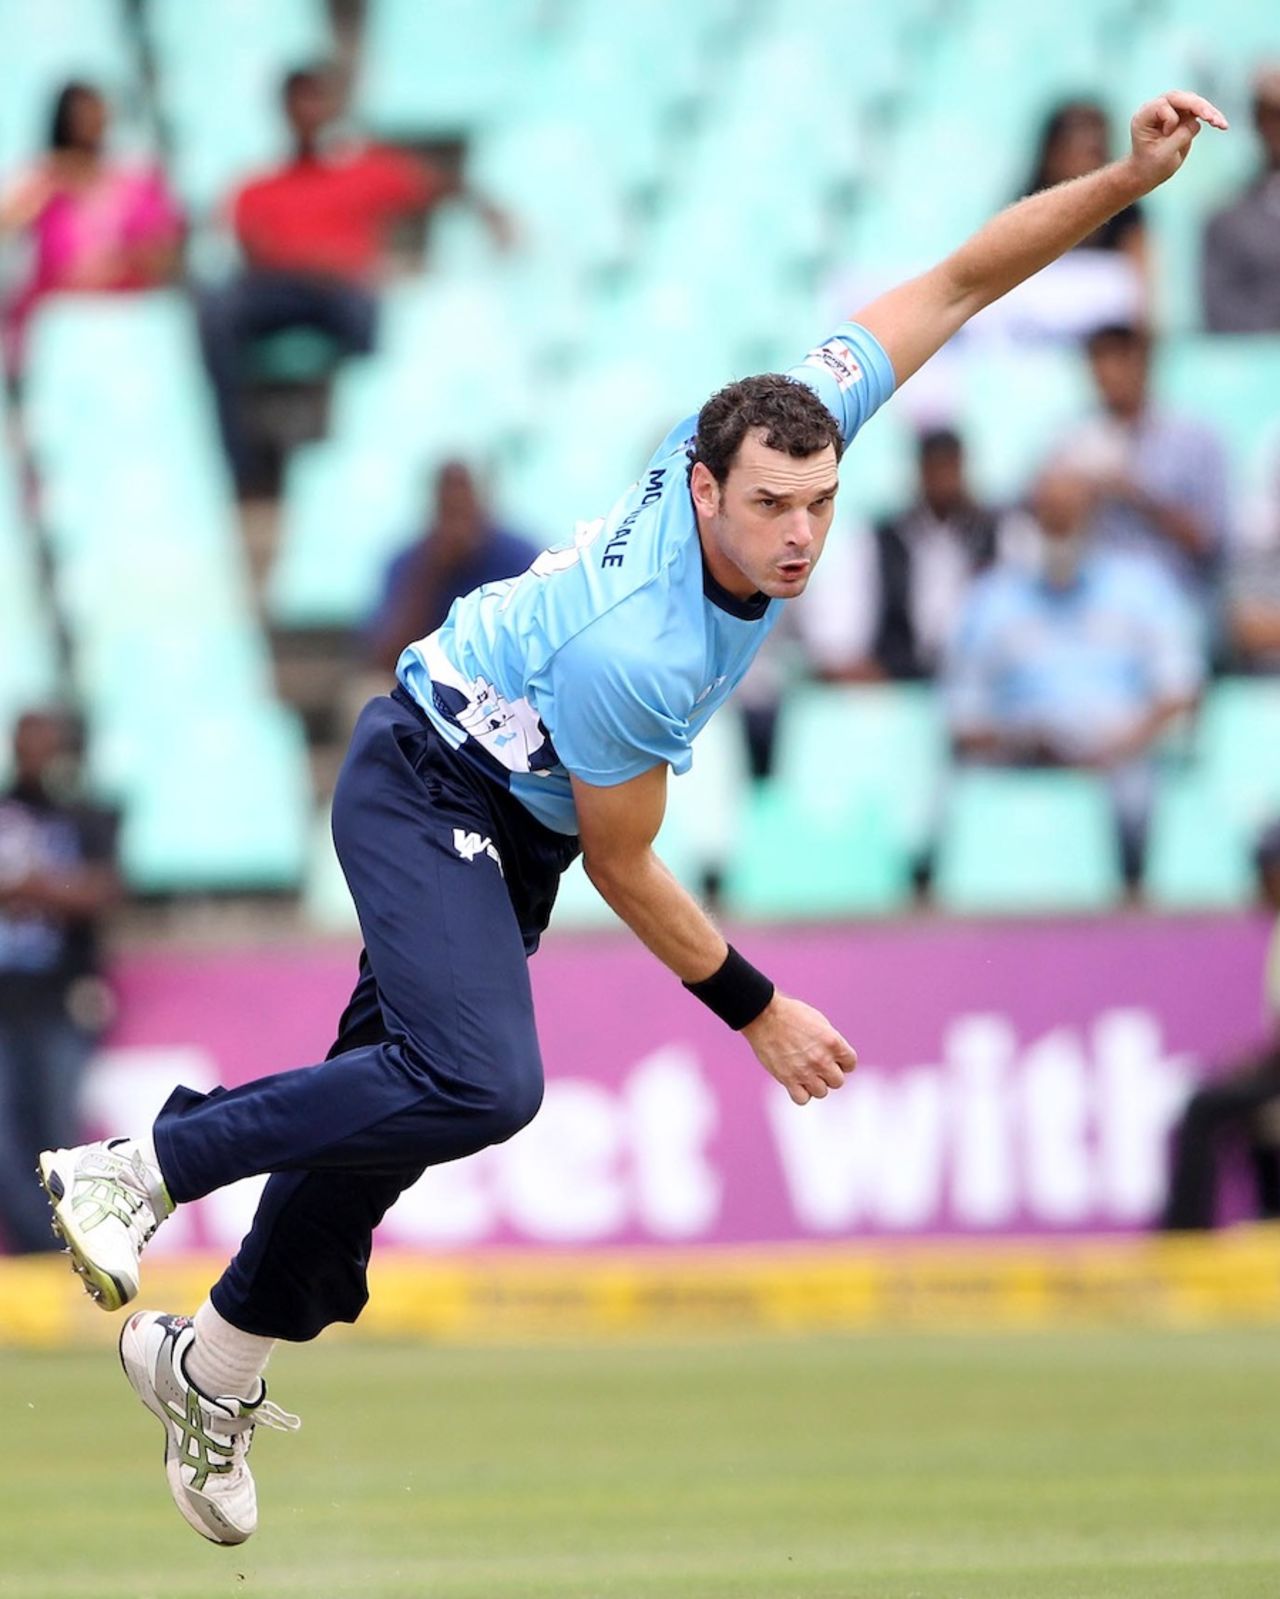 Kyle Mills picked up a wicket, but was expensive, Auckland Aces v Titans, Group A, Champions League T20, Durban, October 17, 2012